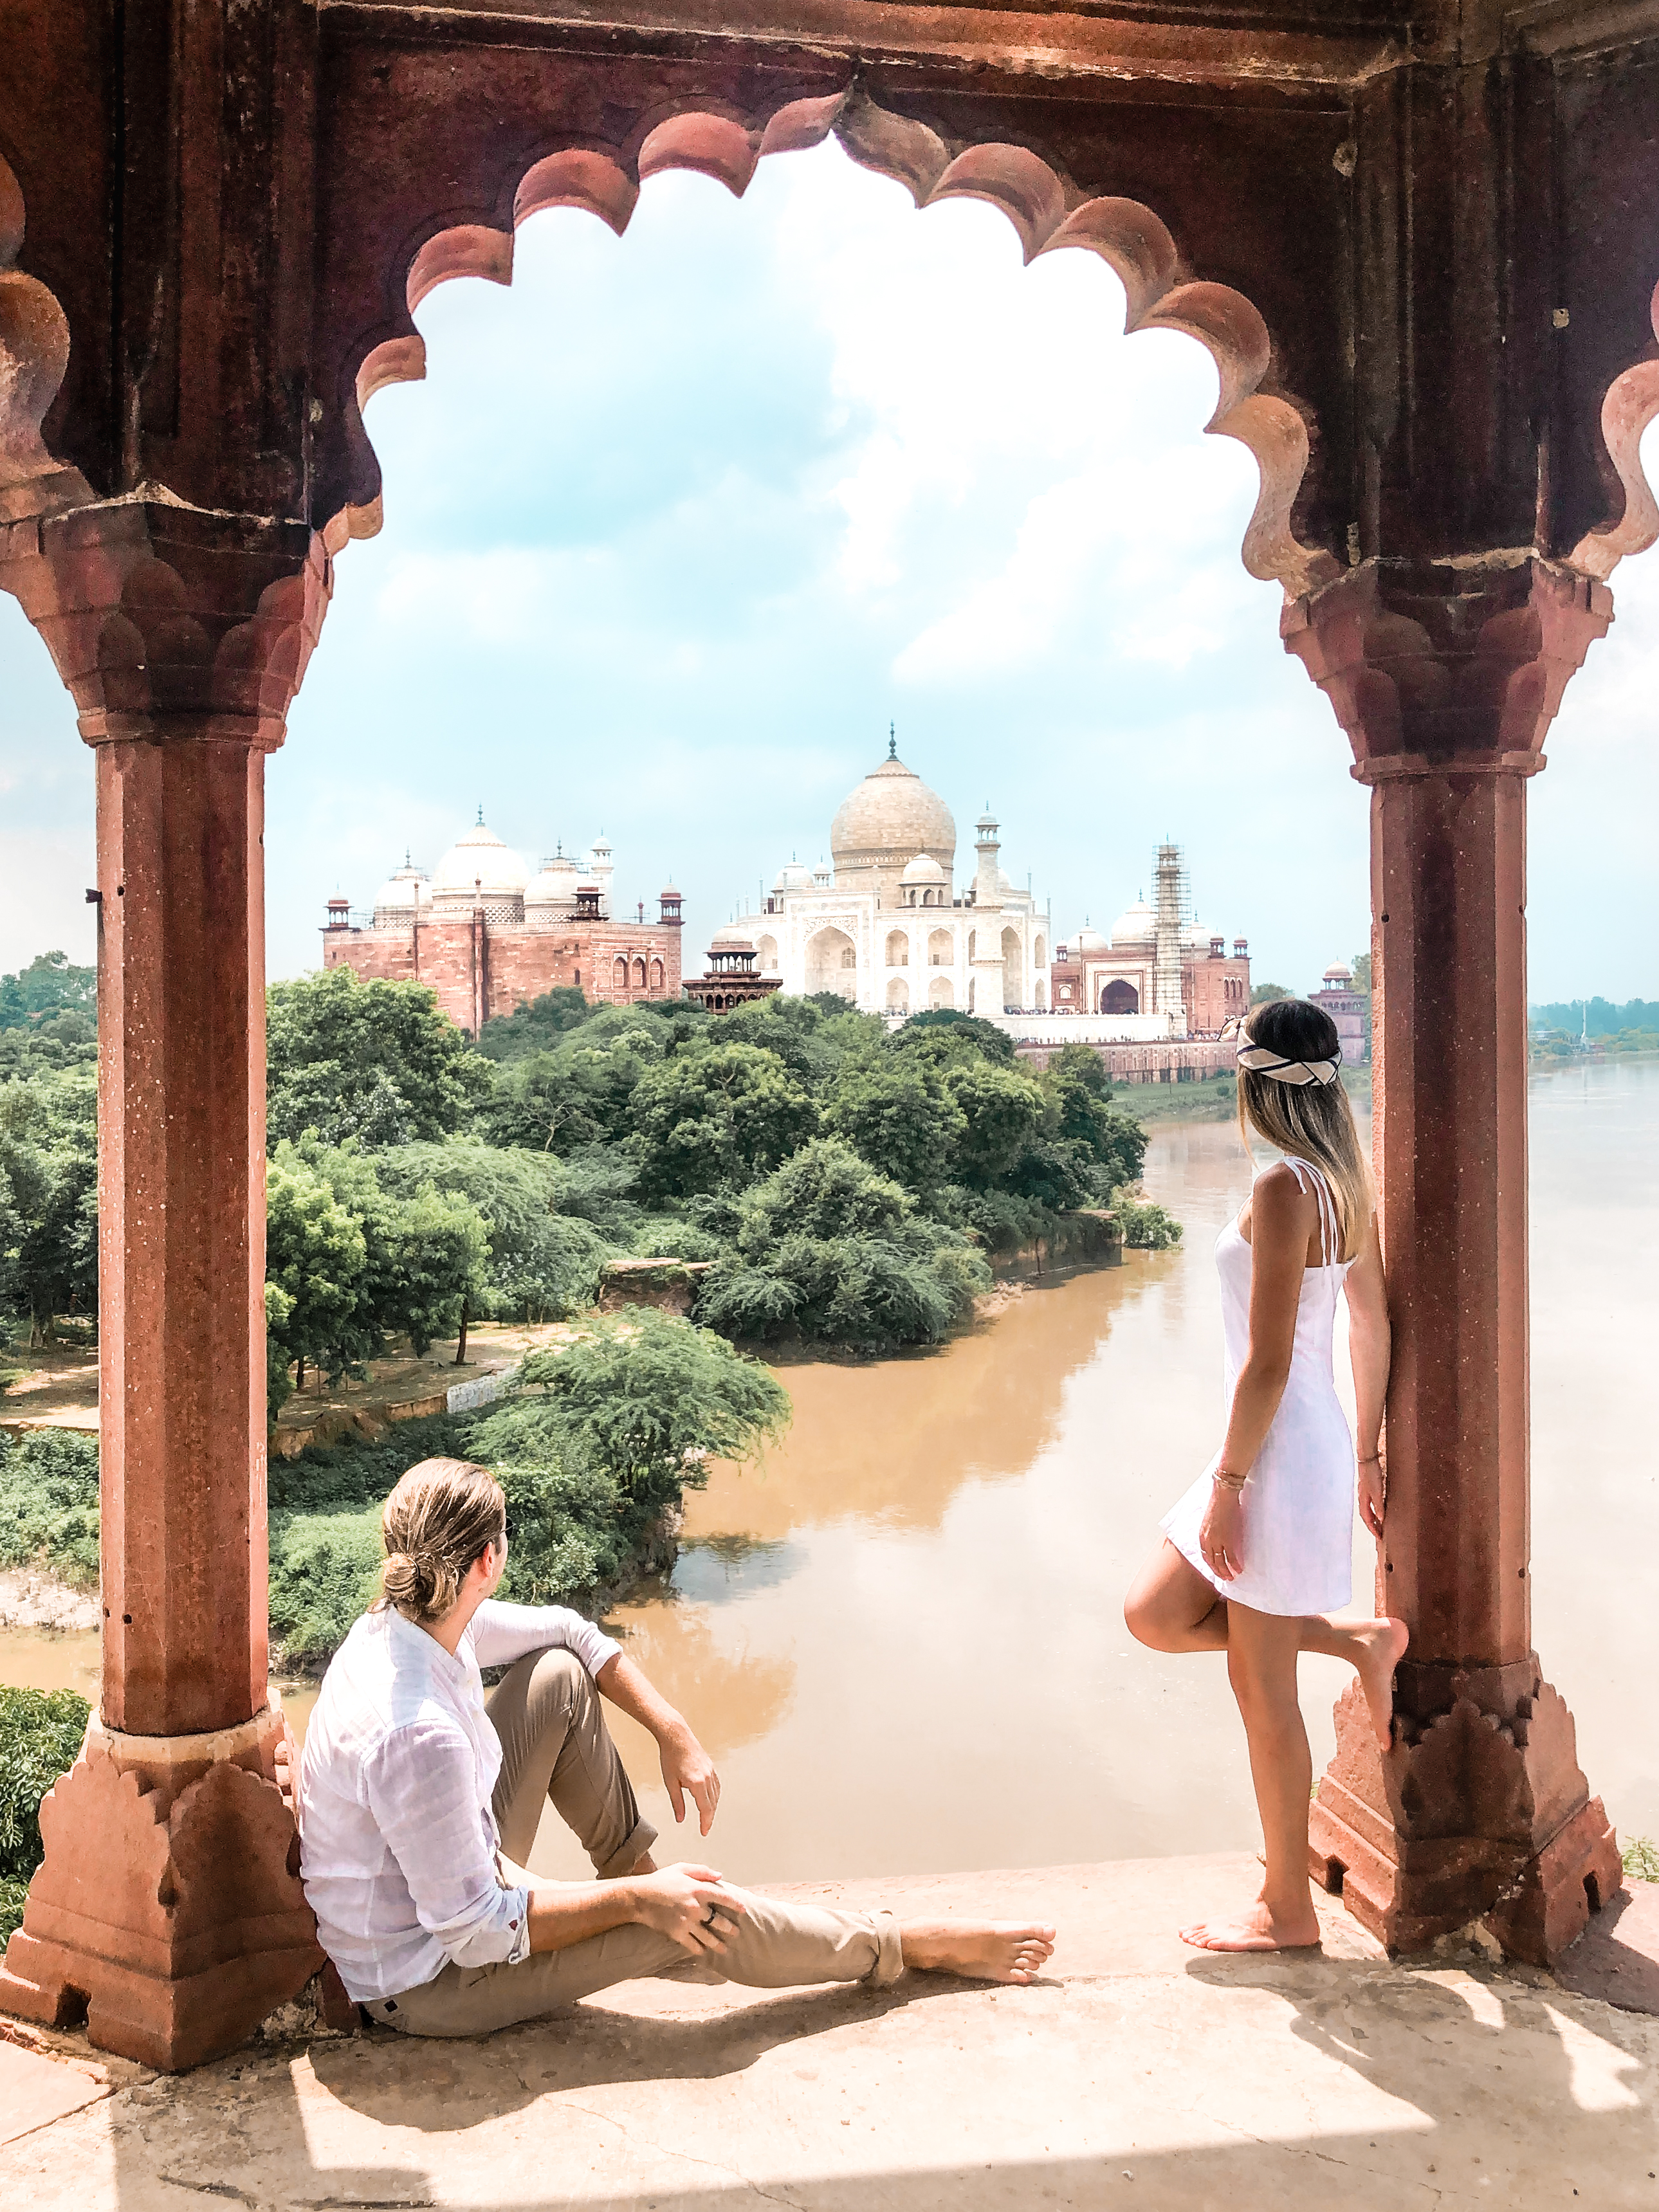 How to Find The Taj Mahal View Point - american and the brit